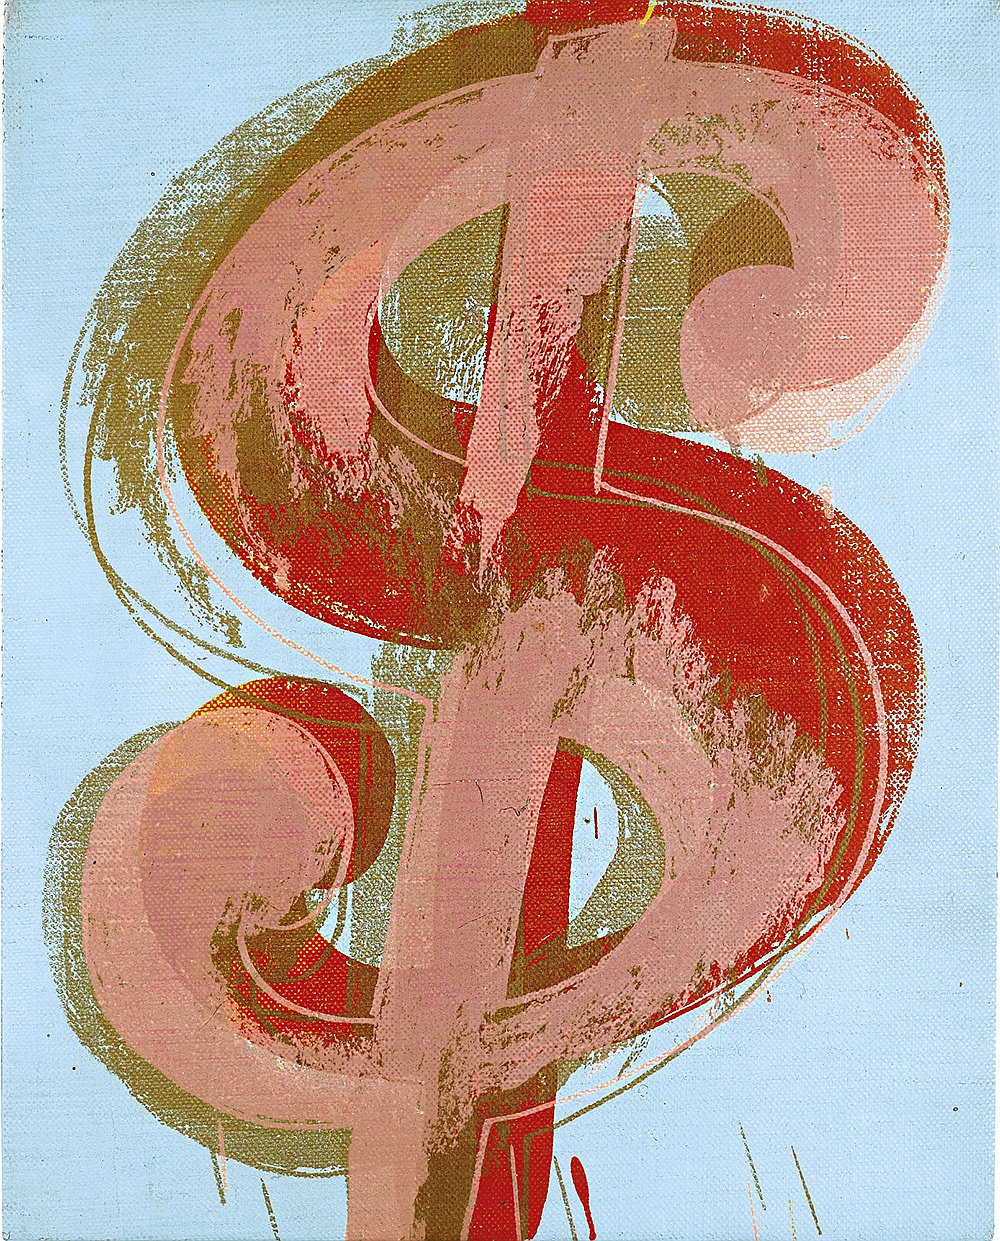 Andy Warhol. Dollar Sign. 1981. Courtesy of Sotheby'